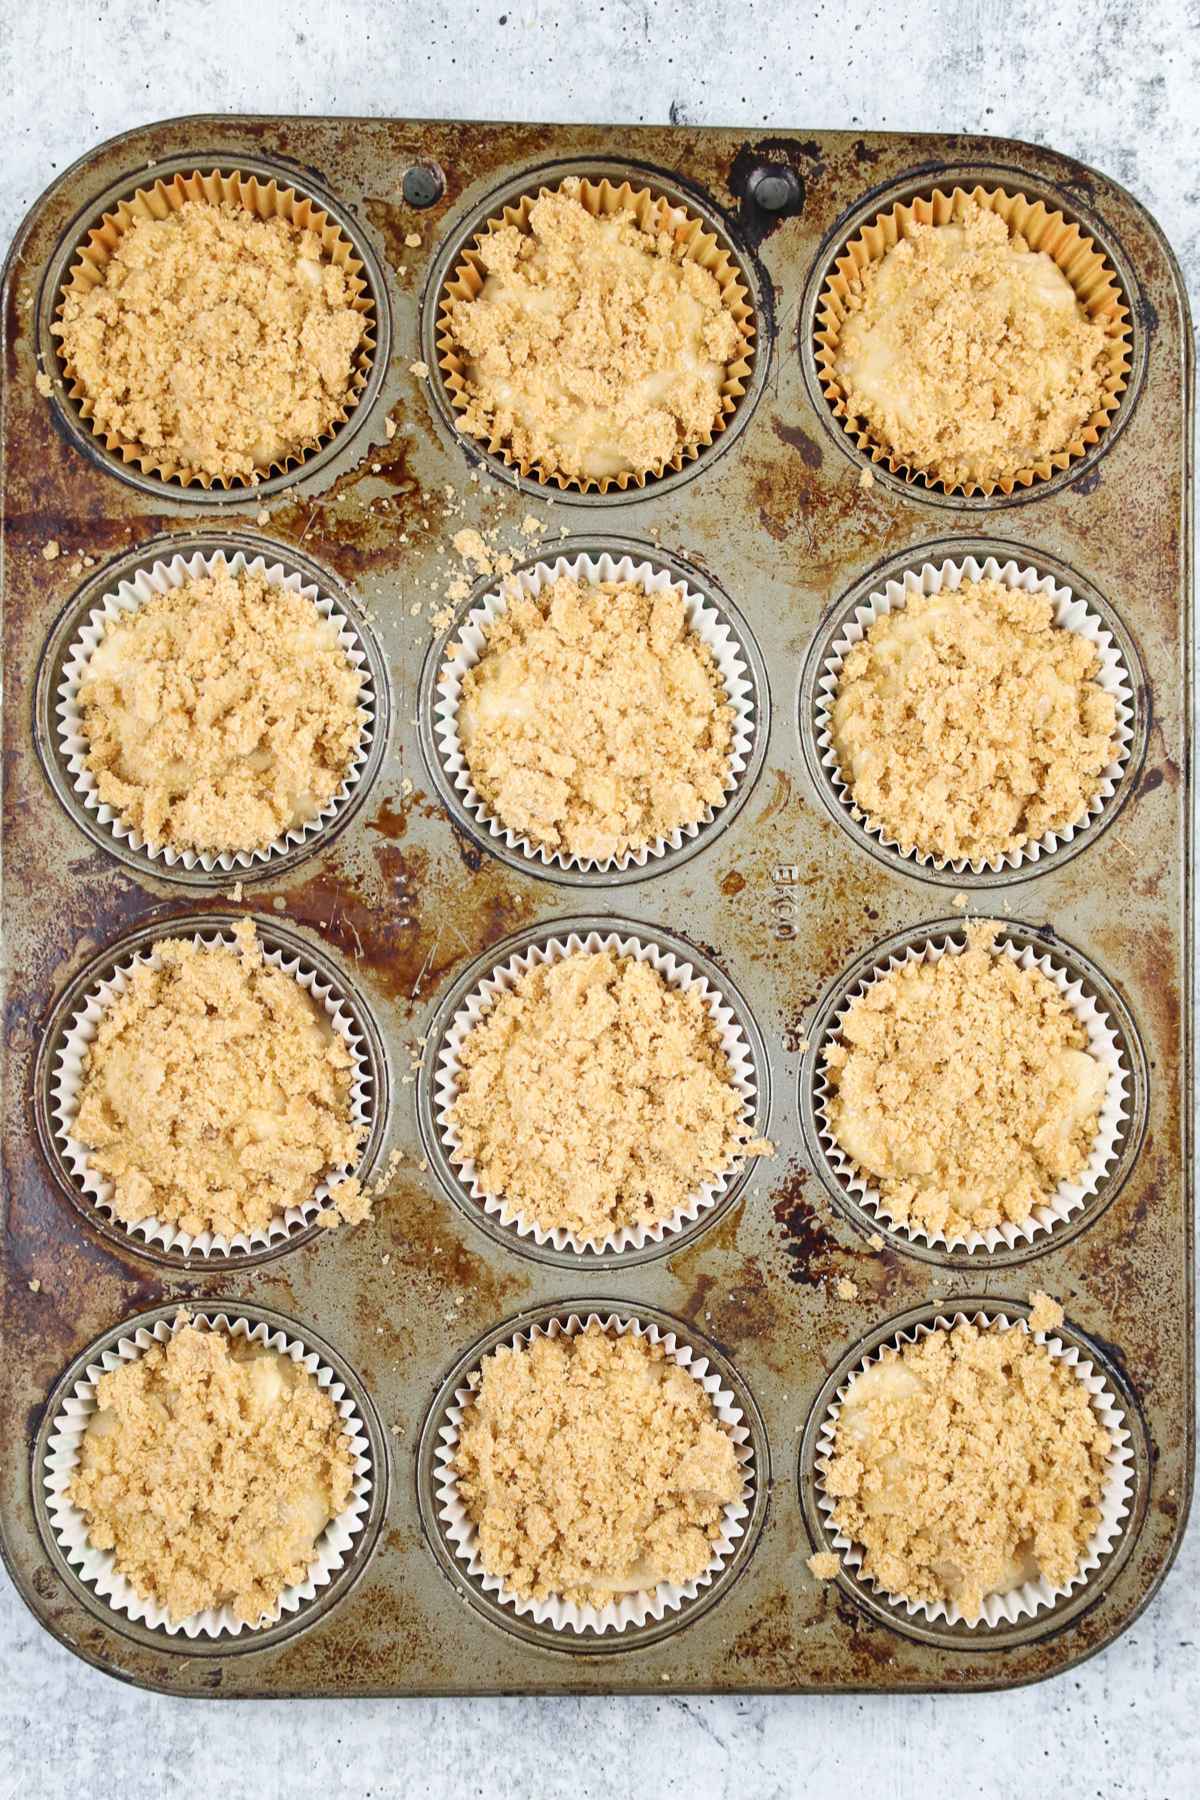 Muffin batter in tin with crumb topping before baking.